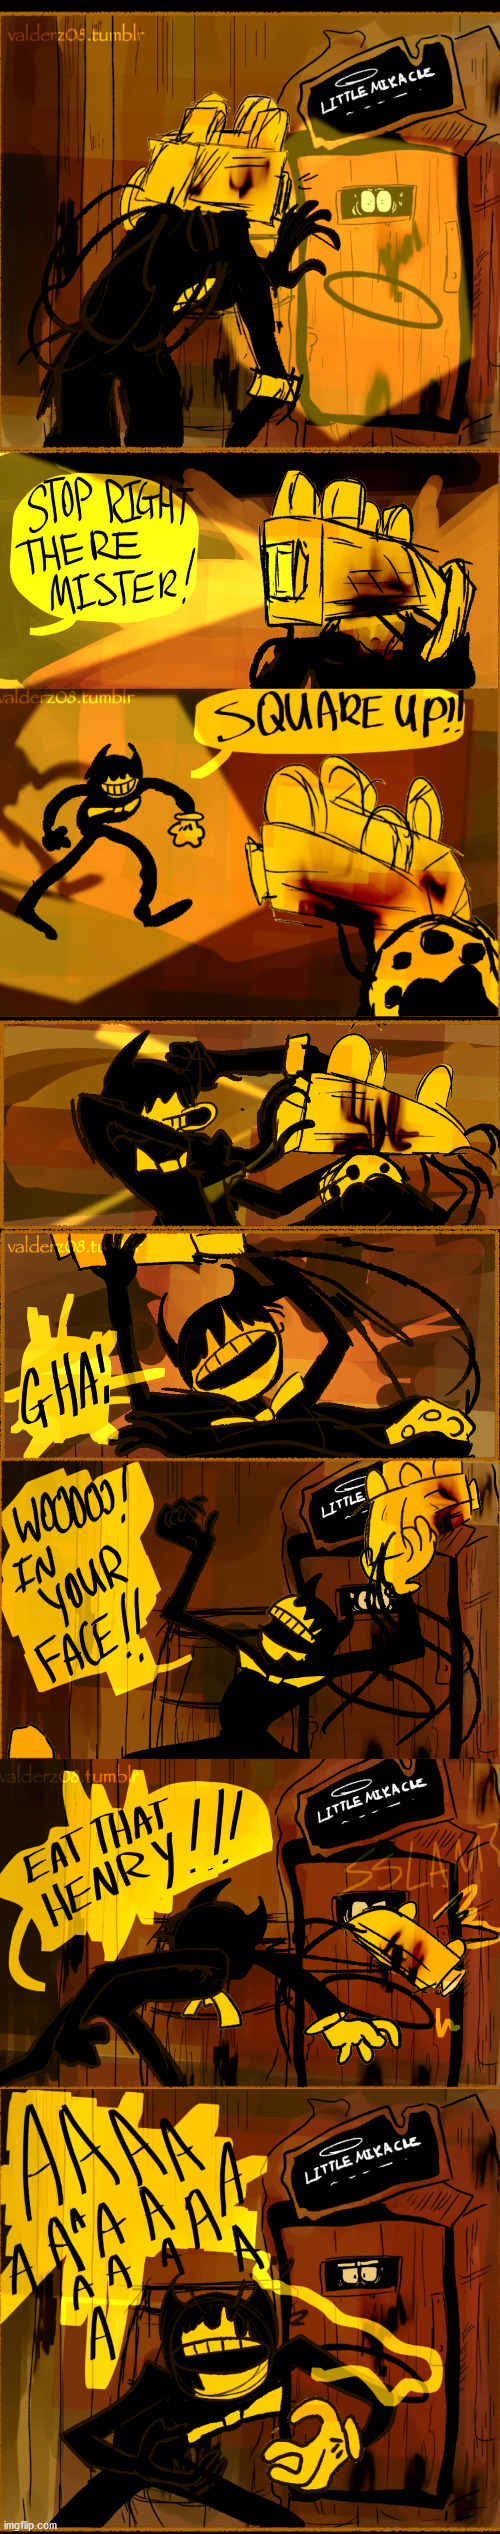 comic i saw (this aint mine) | image tagged in bendy,comic,batim,projector,henry | made w/ Imgflip meme maker